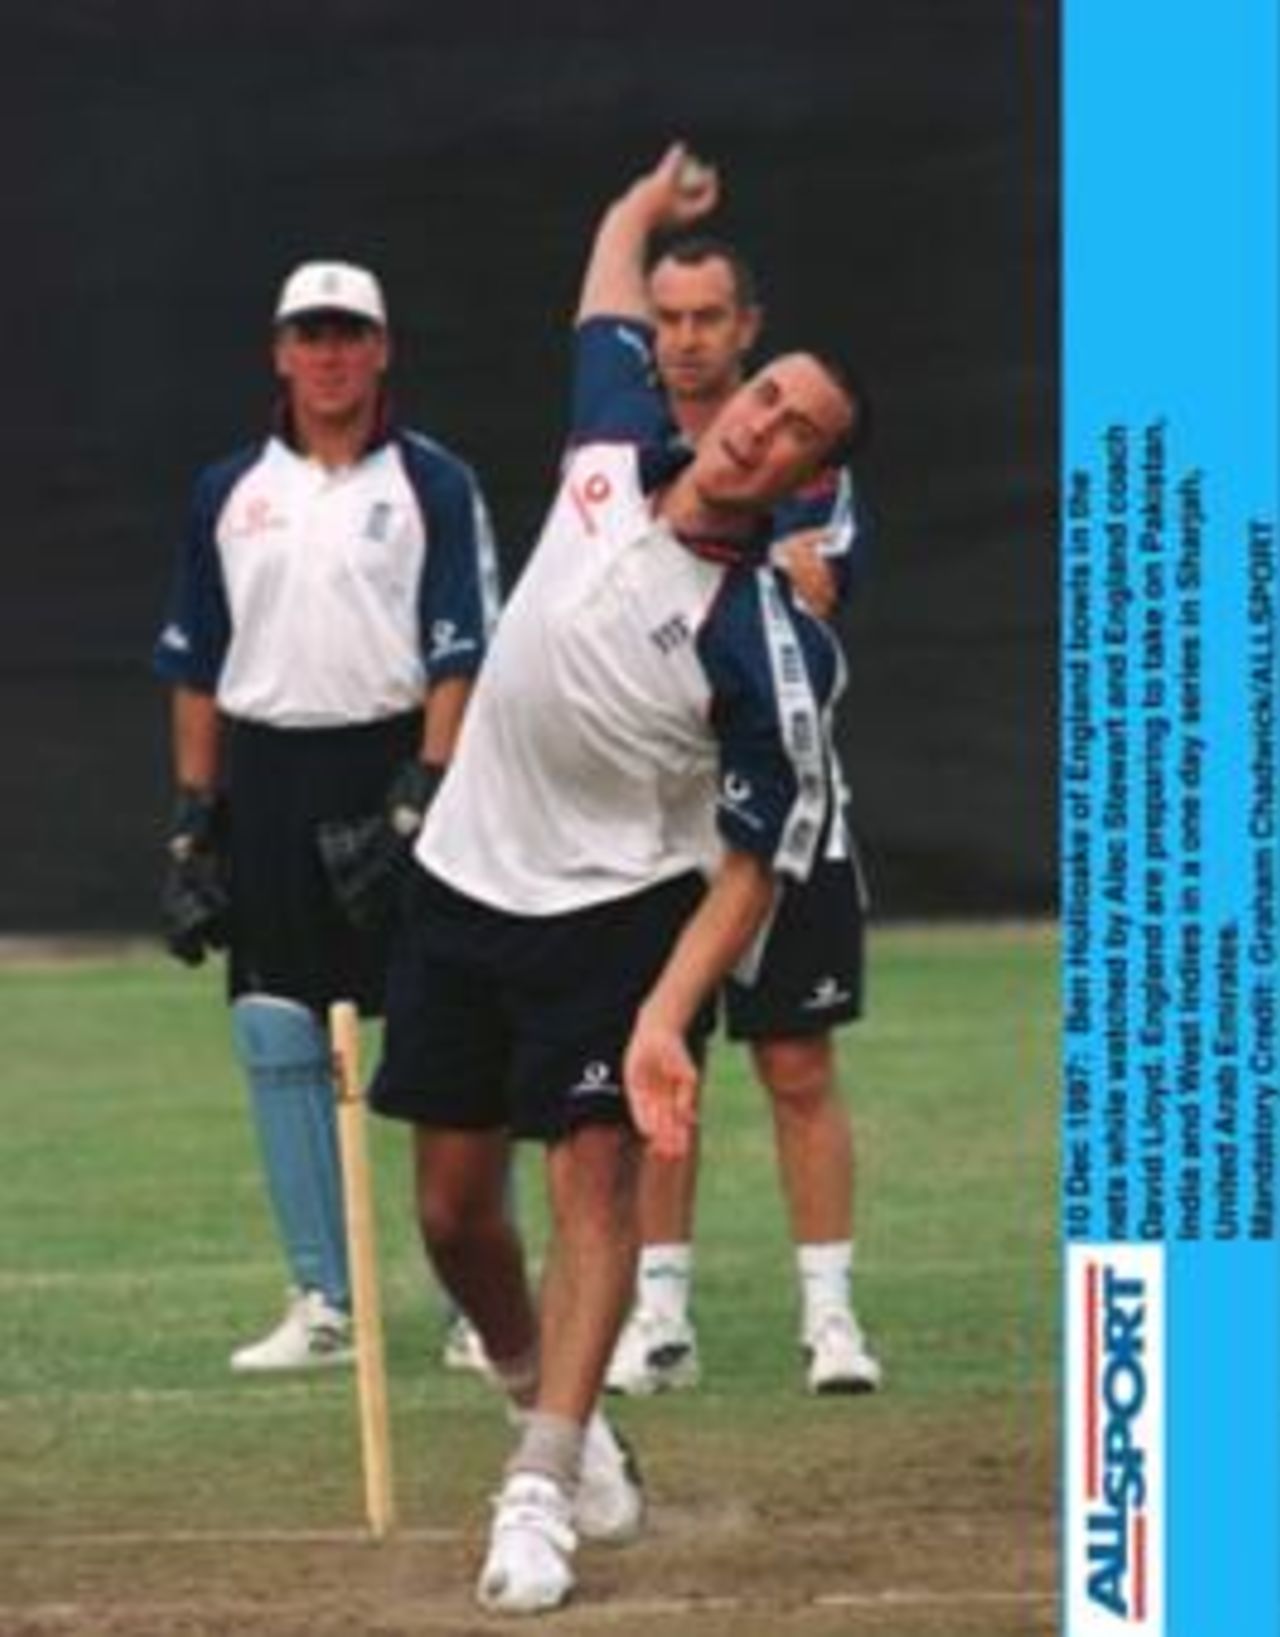 England's Ben Hollioake bowls in the nets watched by Alec Stewart and England coach David Lloyd, on the eve of the first match of the Champions Trophy in Sharjah.